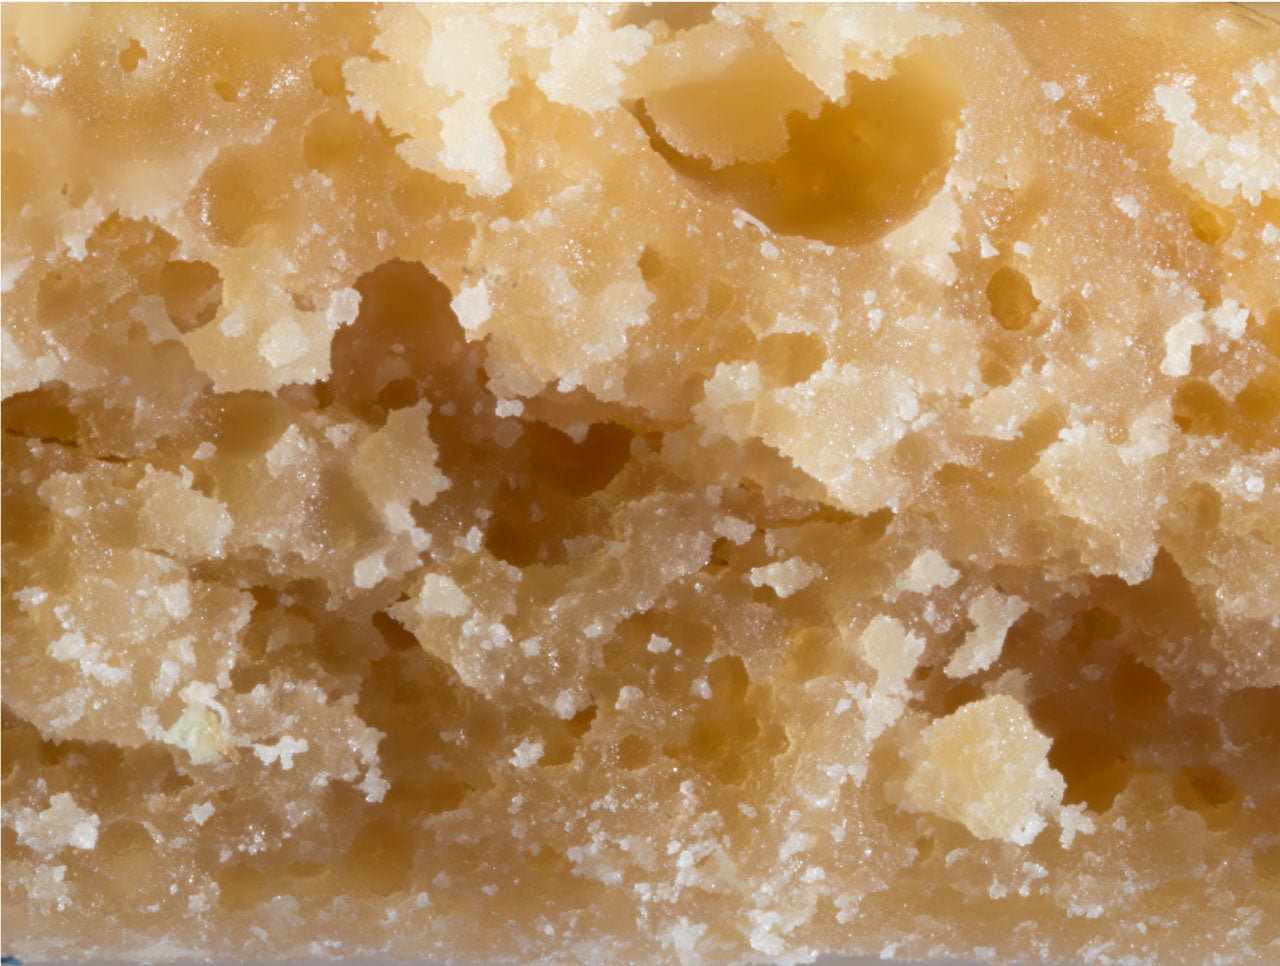 Close up image of CBD crumble concentrate.